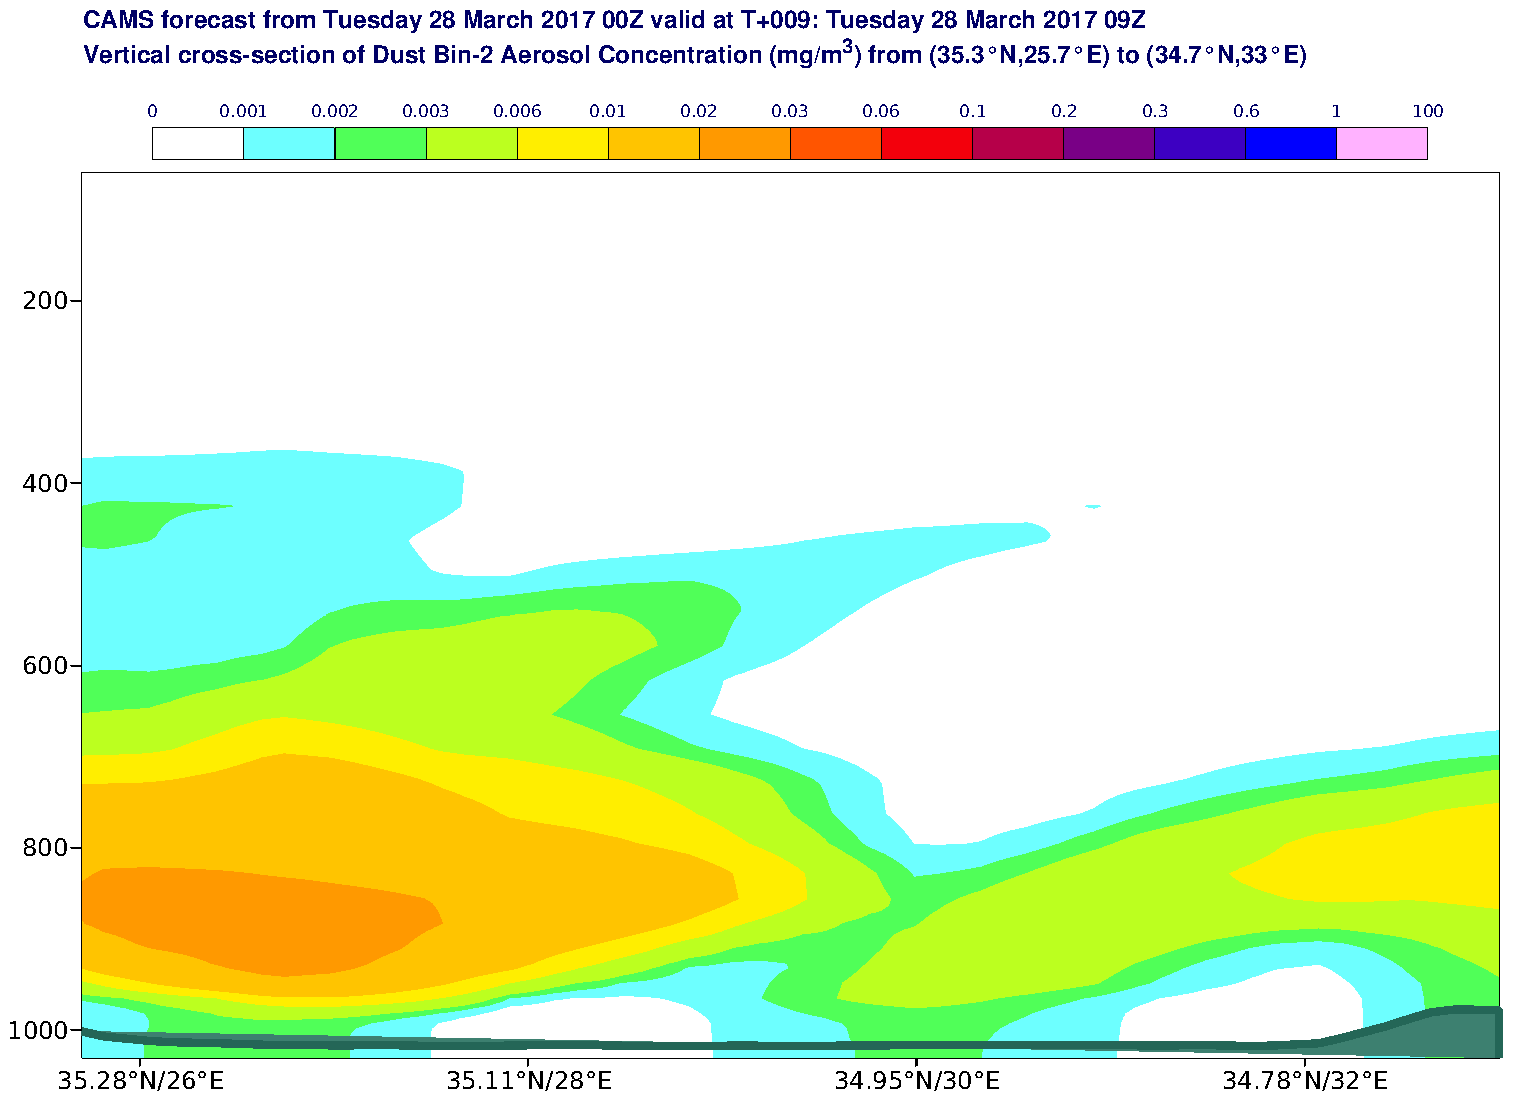 Vertical cross-section of Dust Bin-2 Aerosol Concentration (mg/m3) valid at T9 - 2017-03-28 09:00